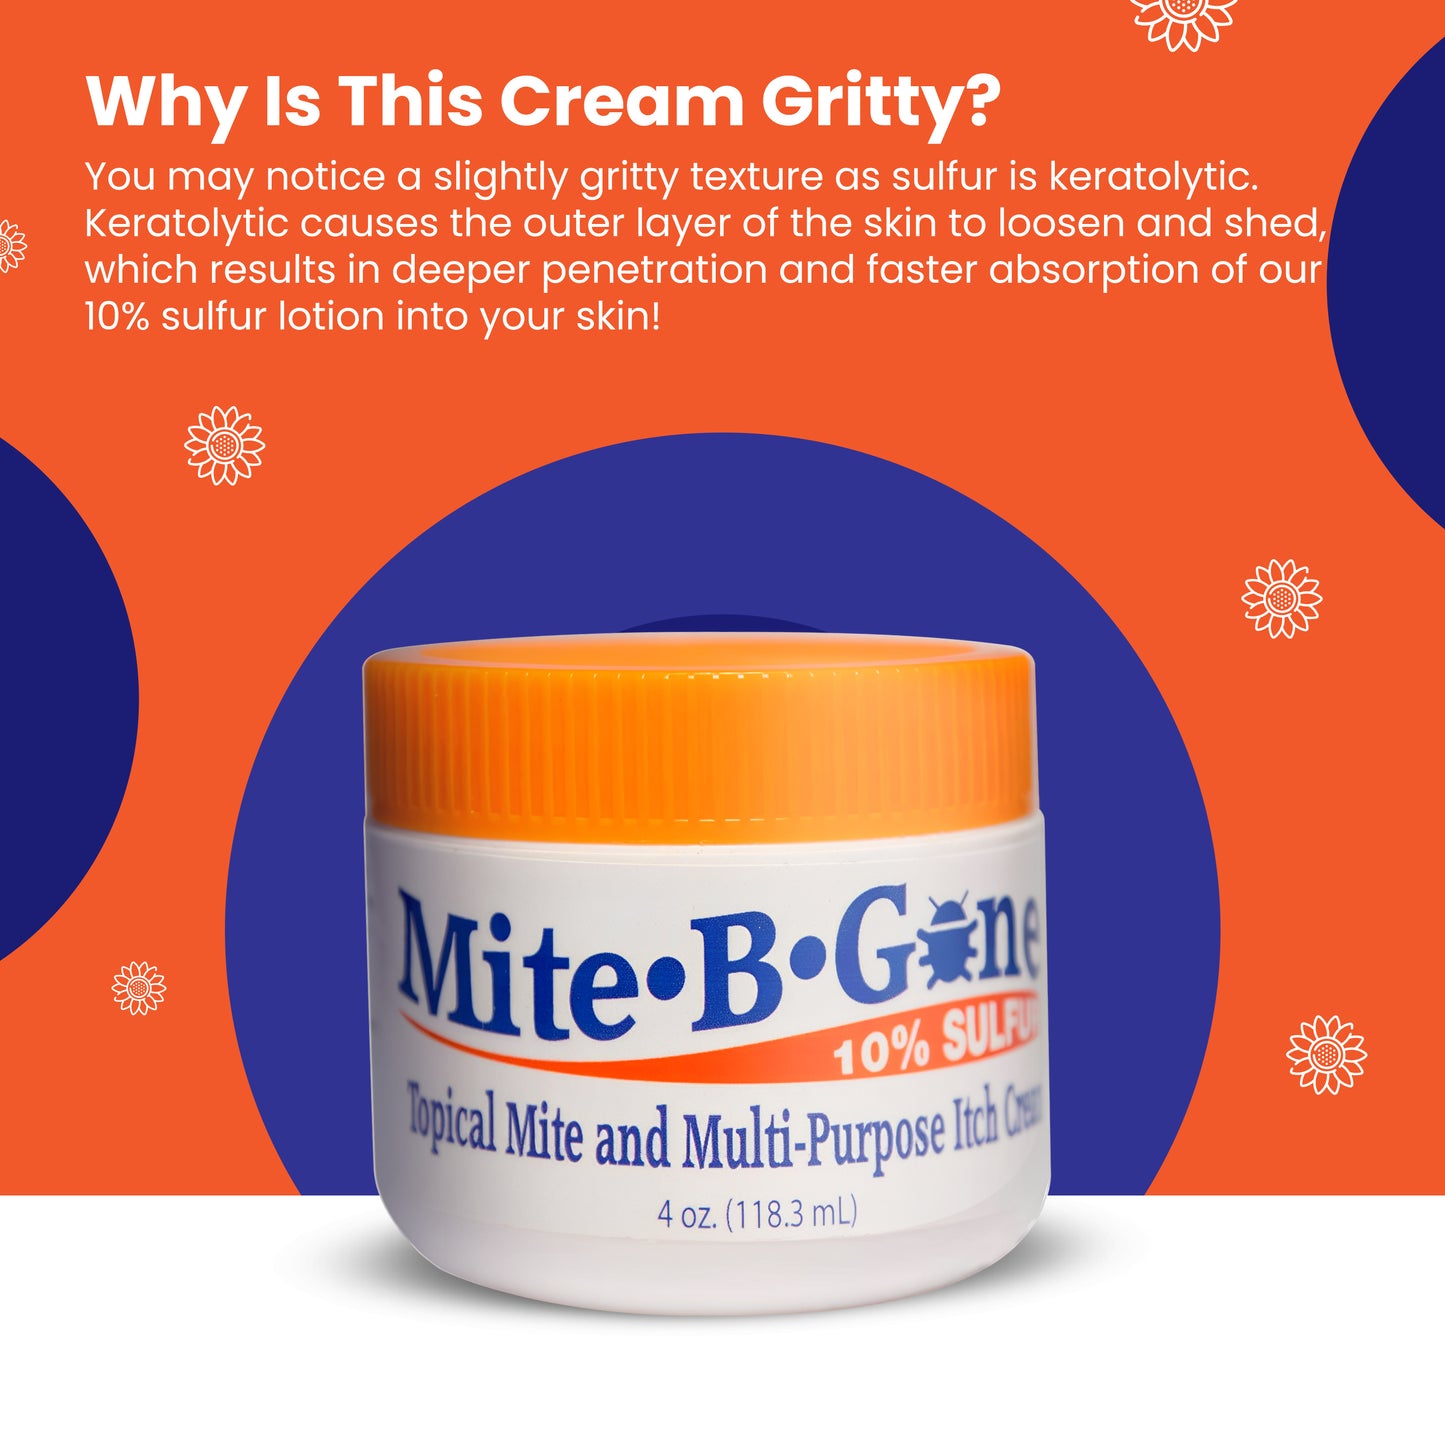 Mite-B-Gone 10% Sulfur Cream (8oz) | Itch Relief from Mites, Insect Bites, Acne, and Fungus